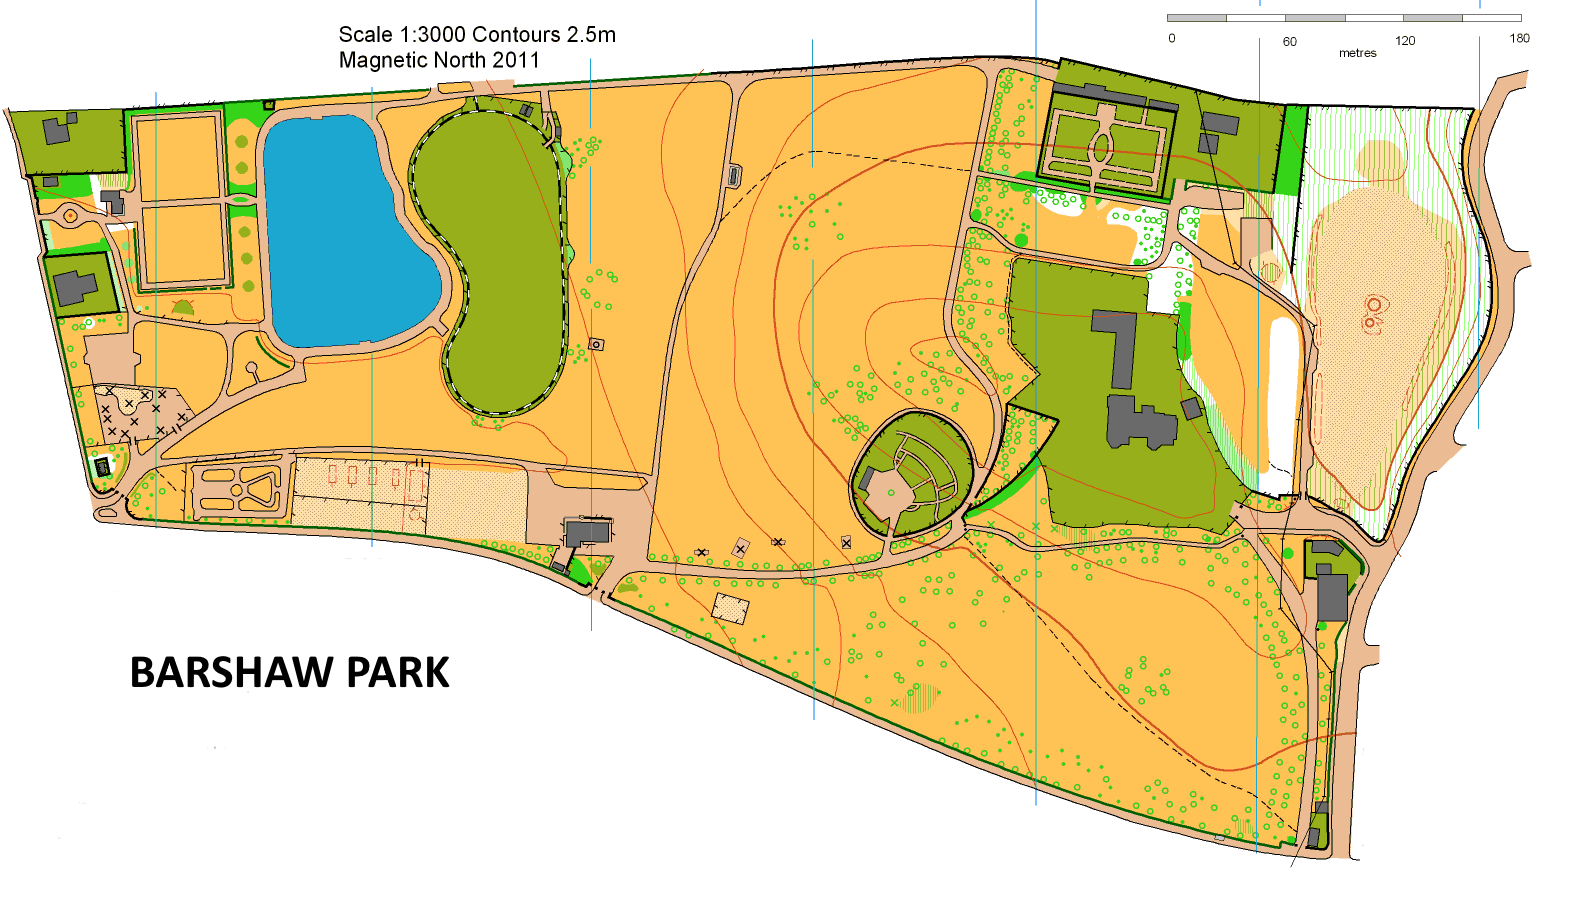 Map of Barshaw Park on outskirts of Paisley